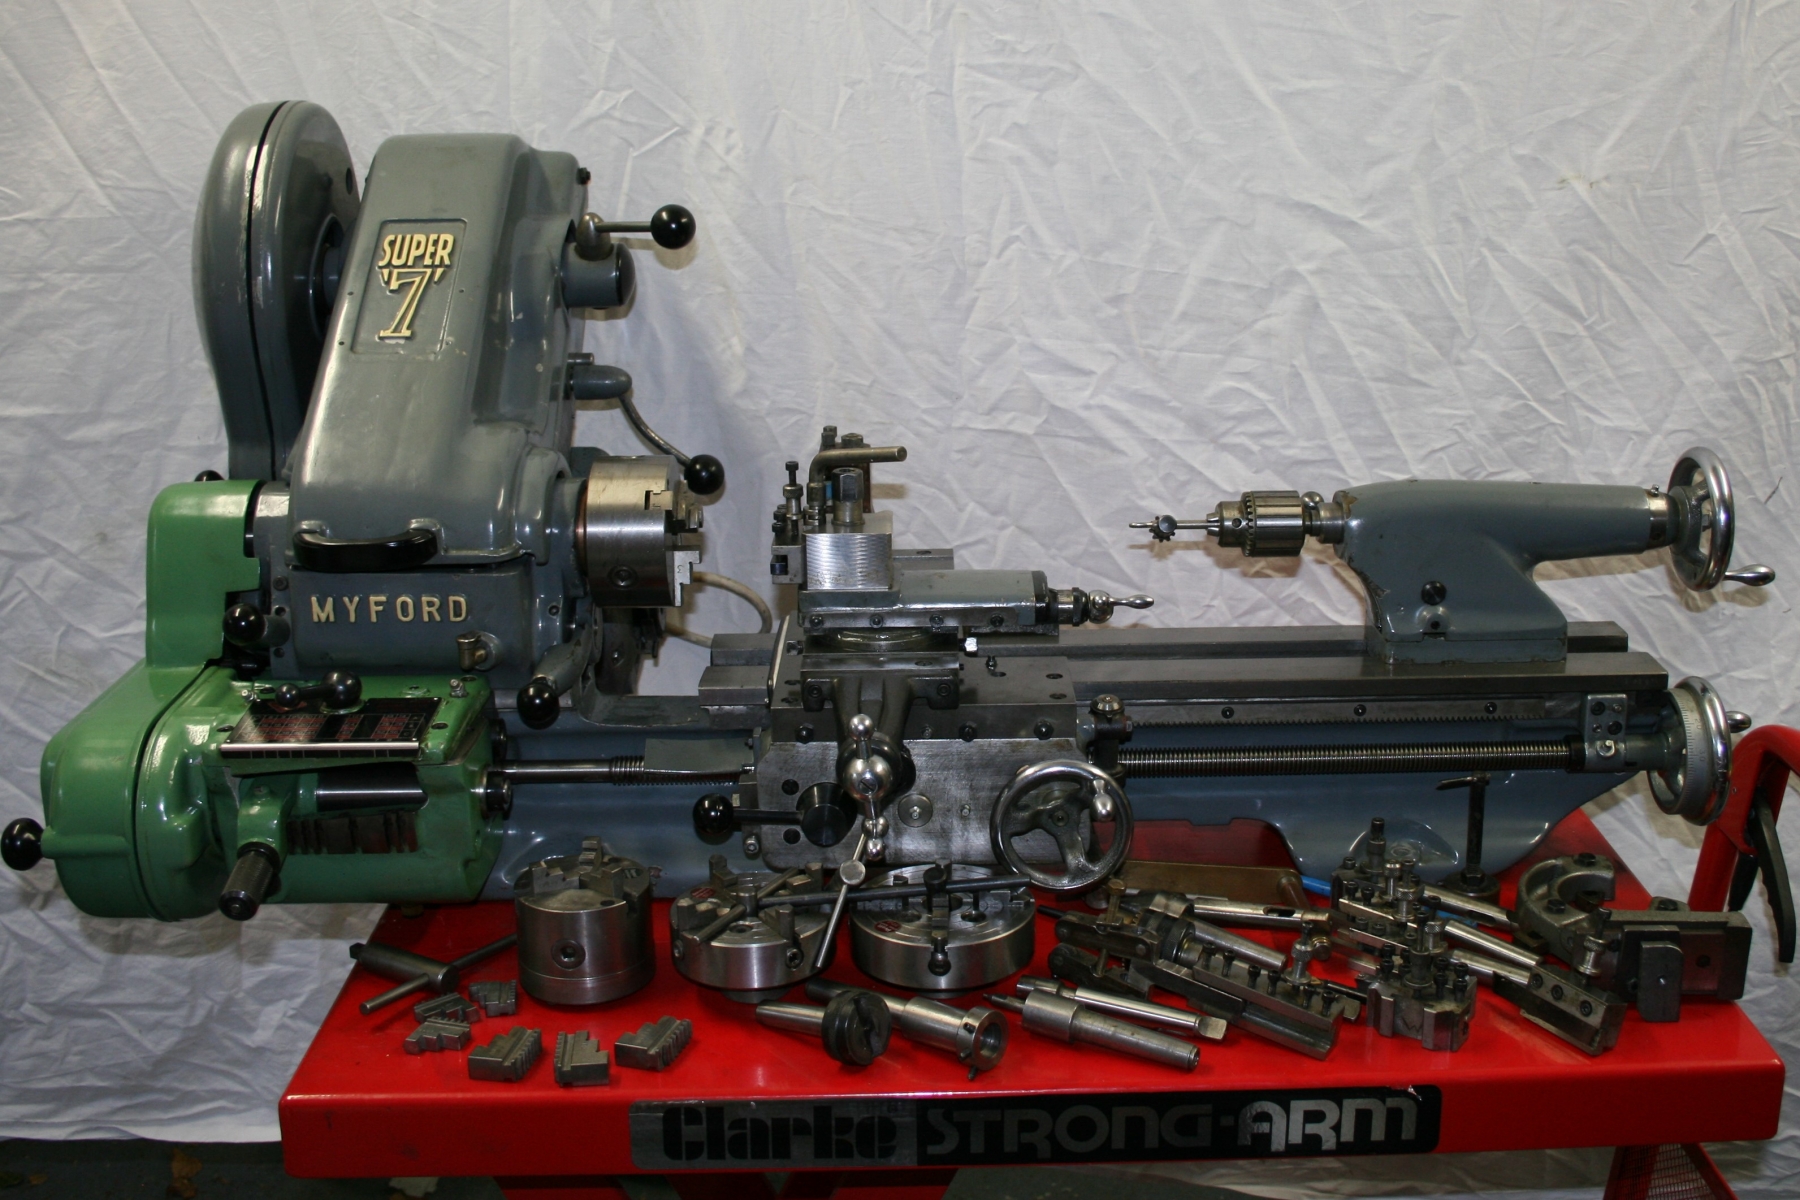 NON-POWER FEED NEW REVISED MYFORD SUPER 7 LATHE OPERATION & PARTS MANUAL 